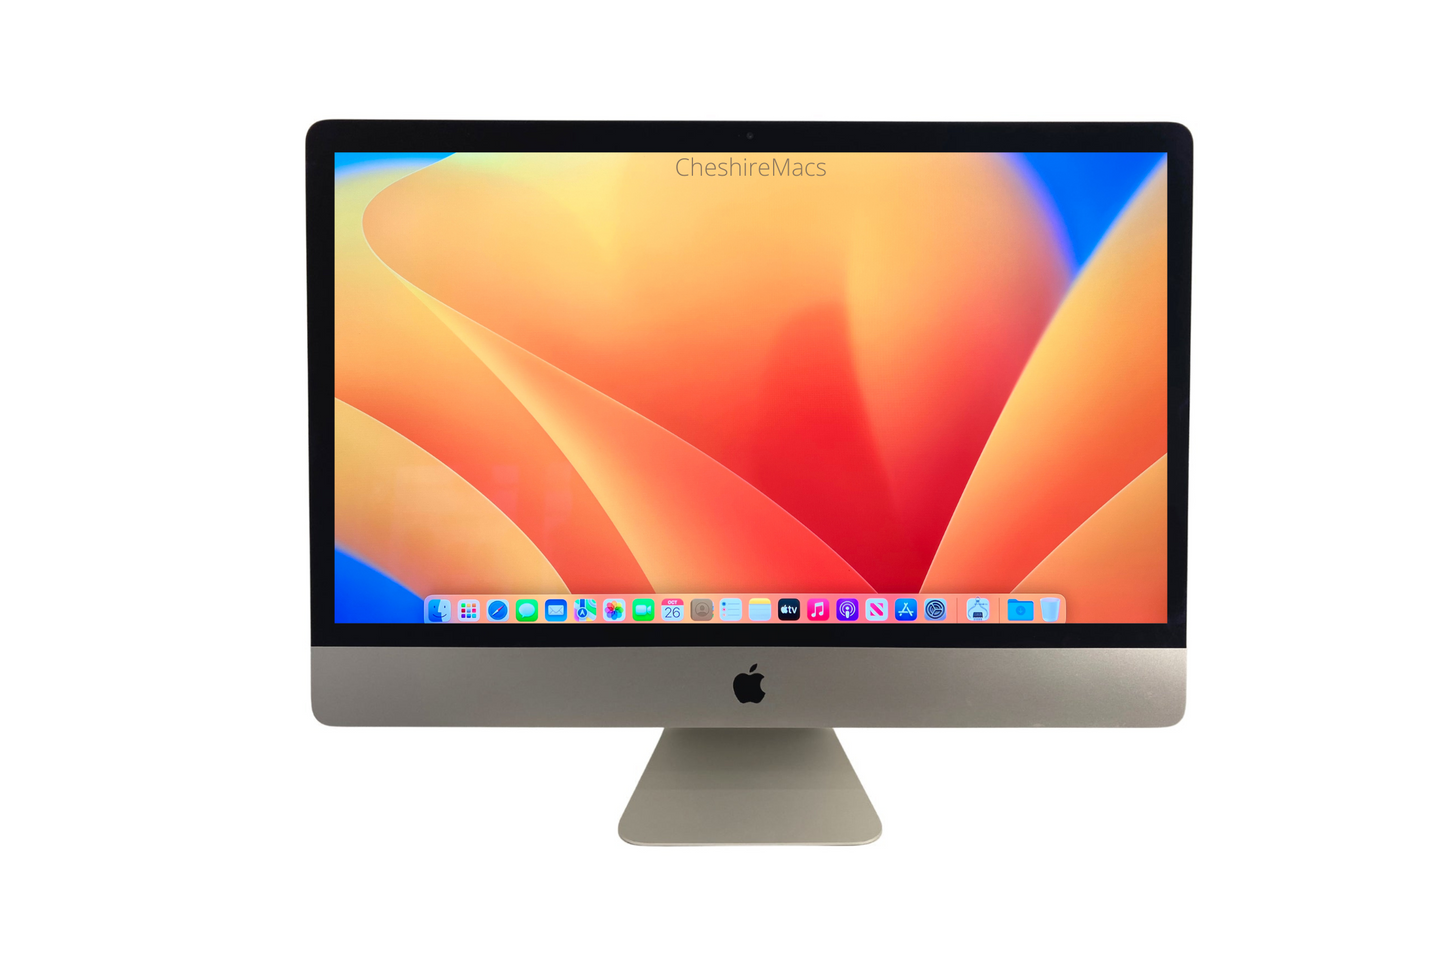 iMac 21.5 inch Core i5 2.3Ghz, 16gb, 1TB Solid State Drive (2017)